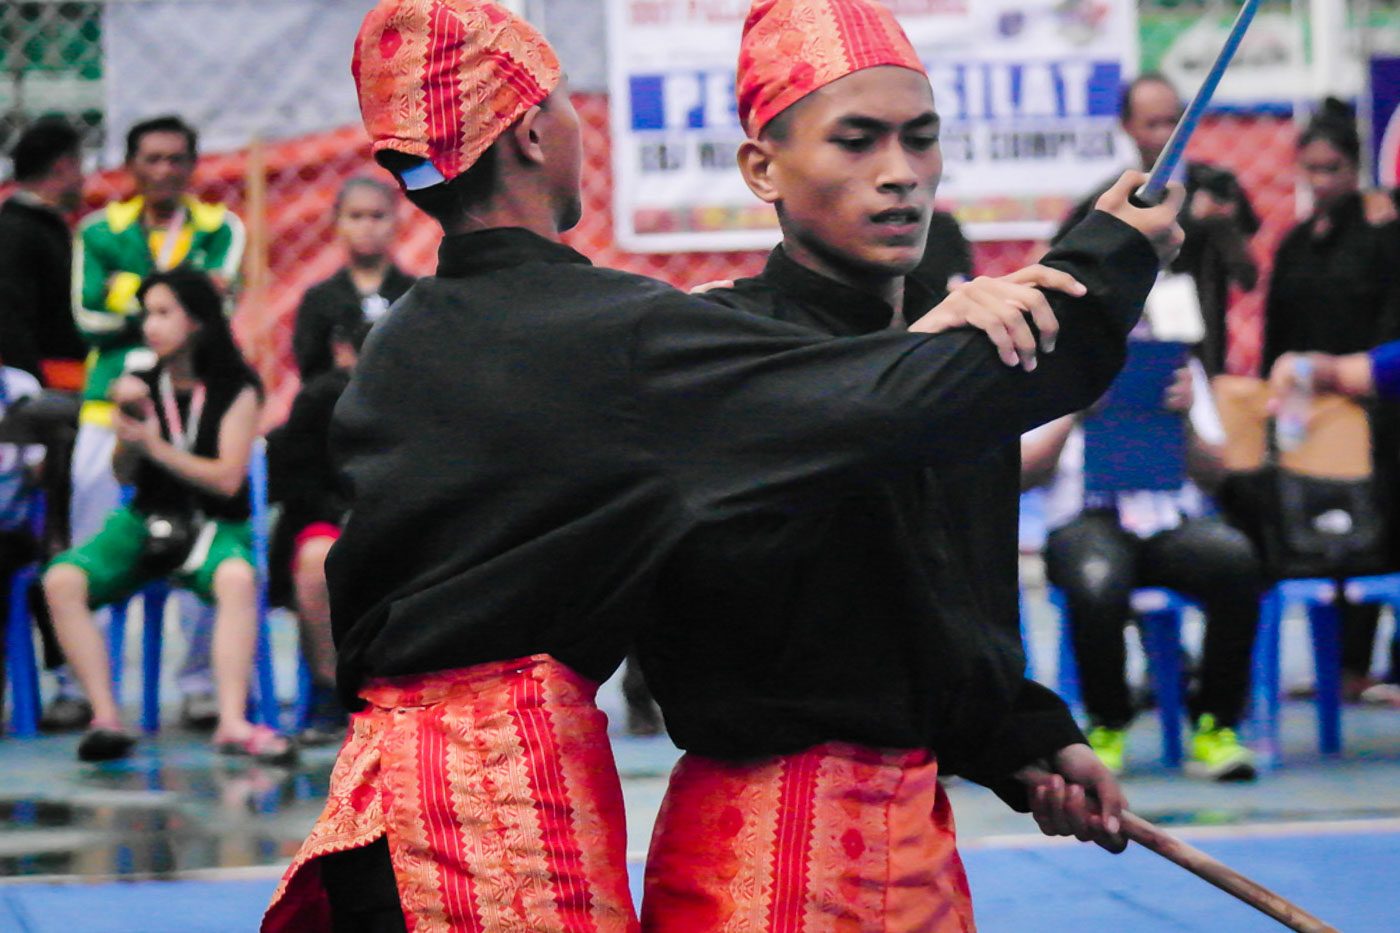 DEADLOCK. A Pencak Silat contender takes a deep breath as he looks for ways to counter his opponent's move during the introduction of the art as one of the demonstration sports for the 2017 Palarong Pambansa.  